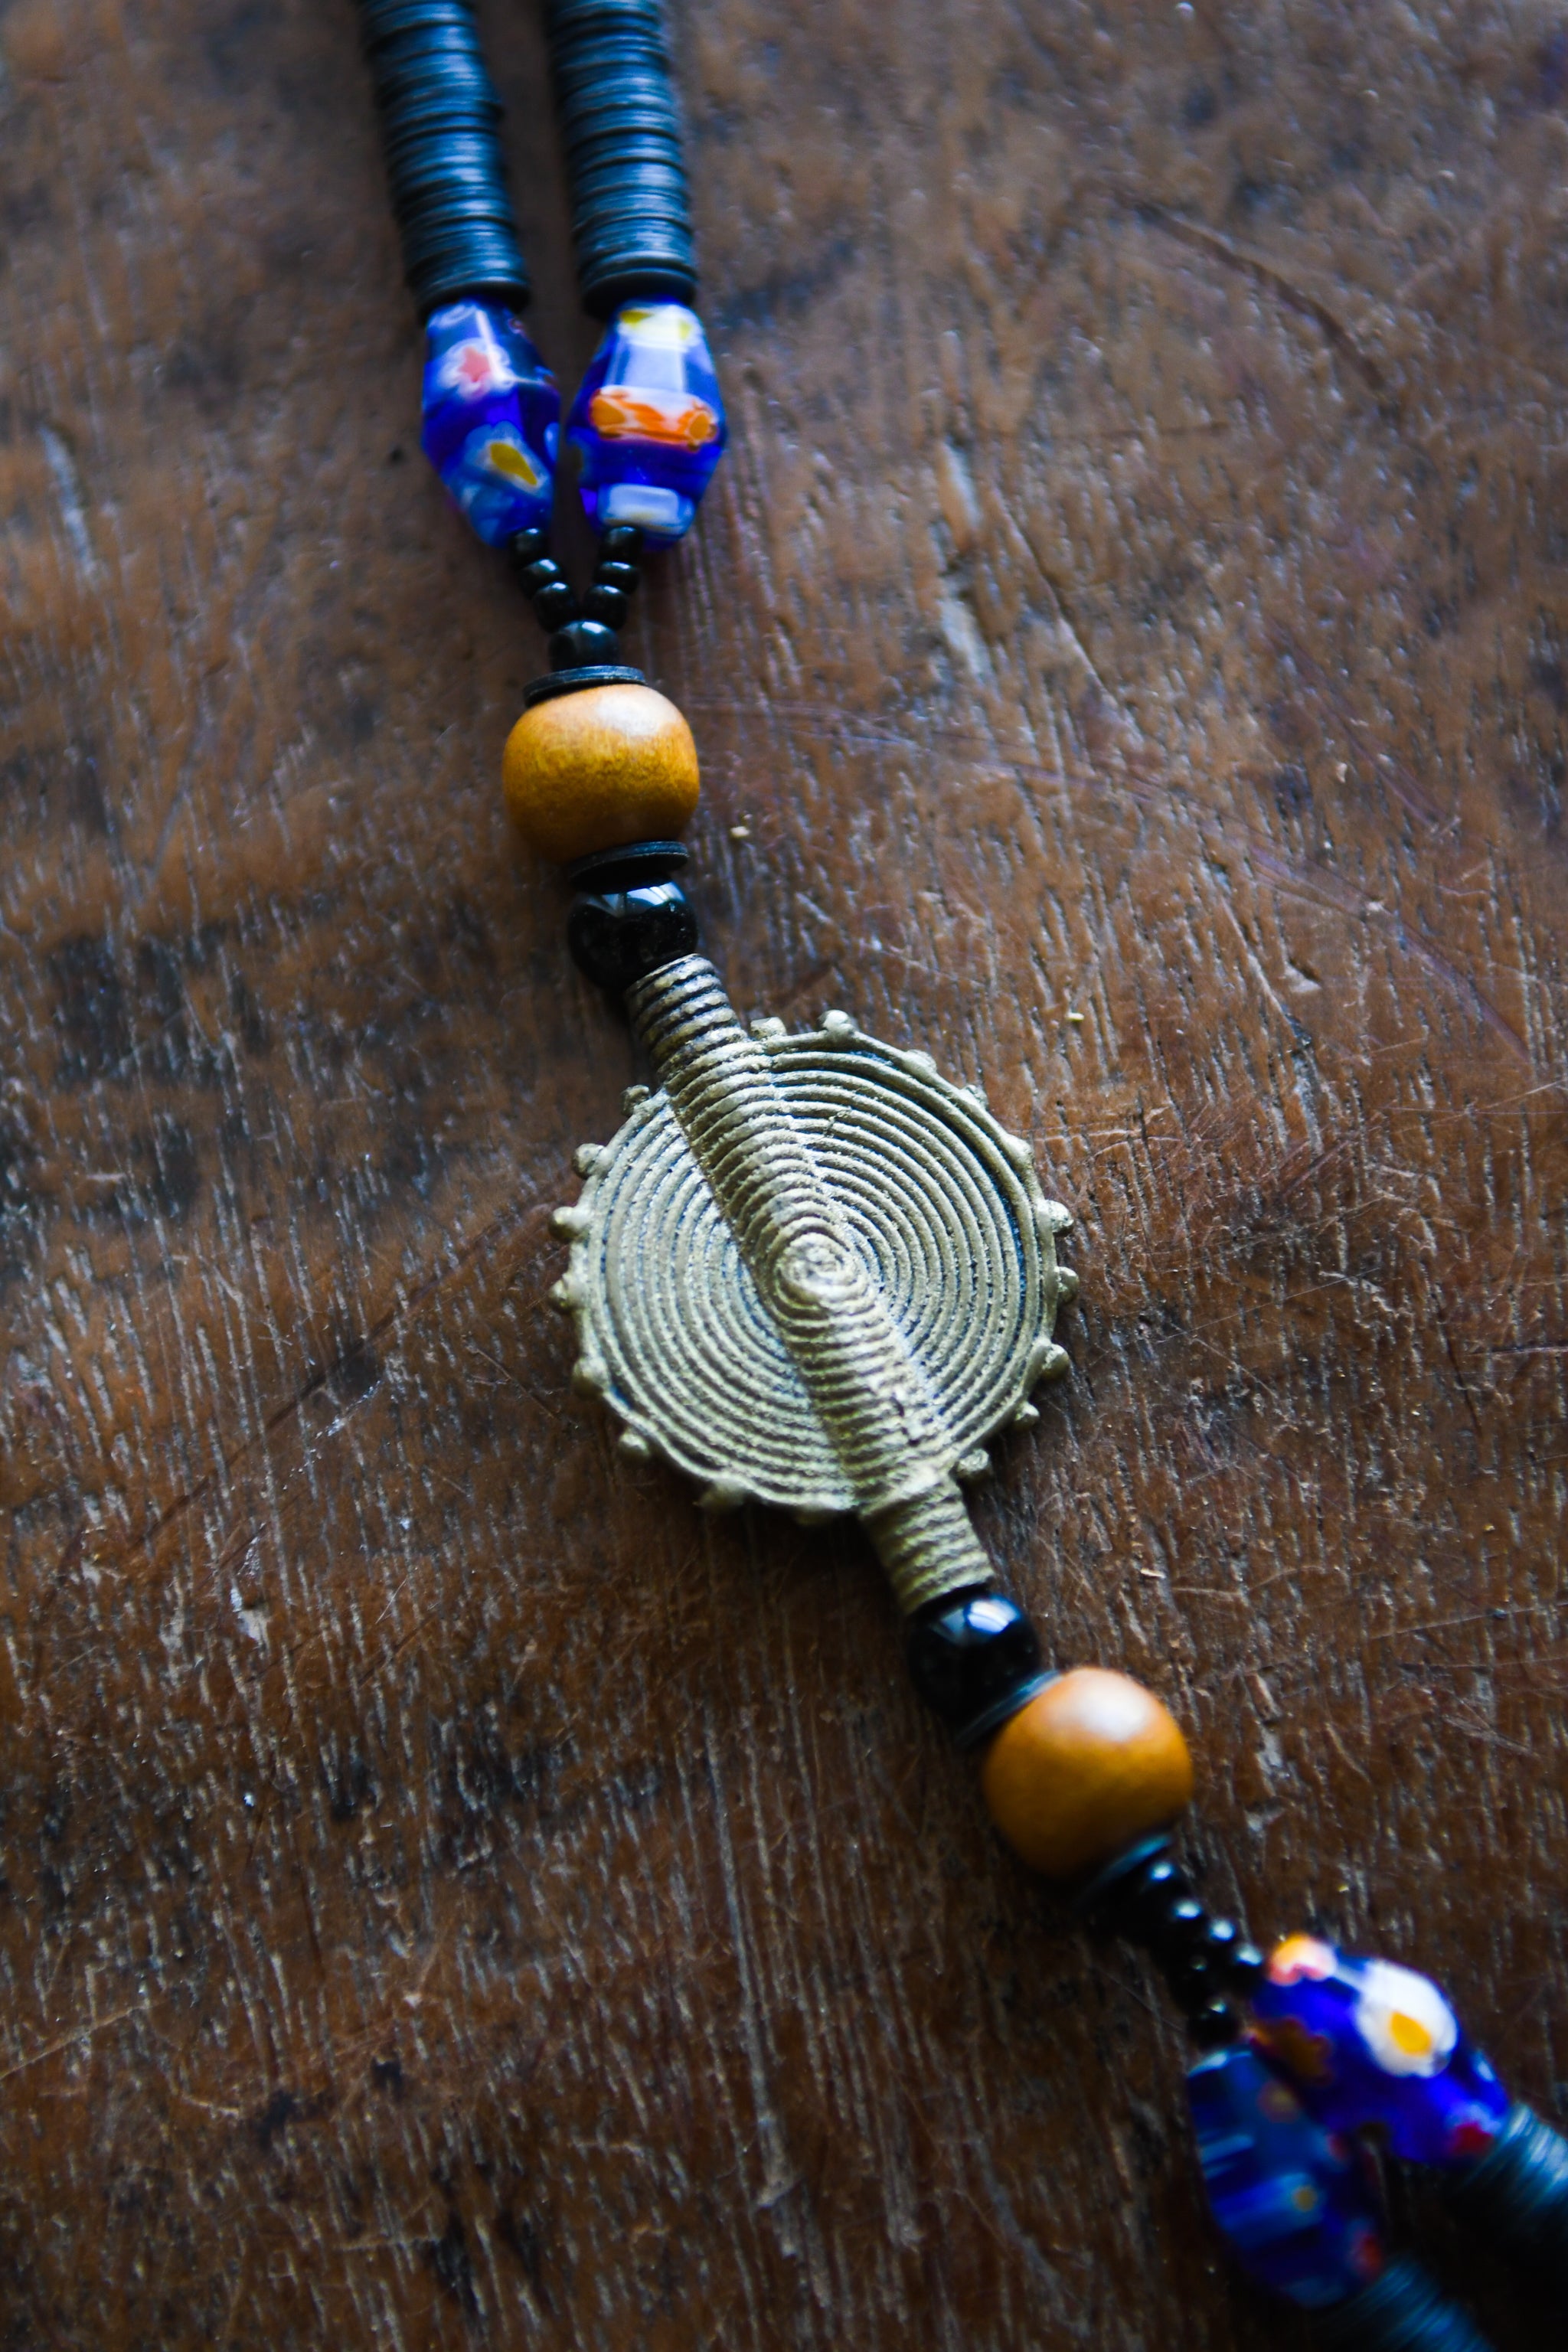 Tribal Necklaces - Handmade - African Art - Jewelry - Traditional - African Necklaces - Beaded - Collectible Necklaces - This Tribal Beads Bronze Pendant Necklace will add flair to any outfit. Crafted from bronze and featuring a unique African tribal design, it is sure to become a conversation starter. Enjoy this striking piece of jewelry and make a statement wherever you go. Length: 21 inches